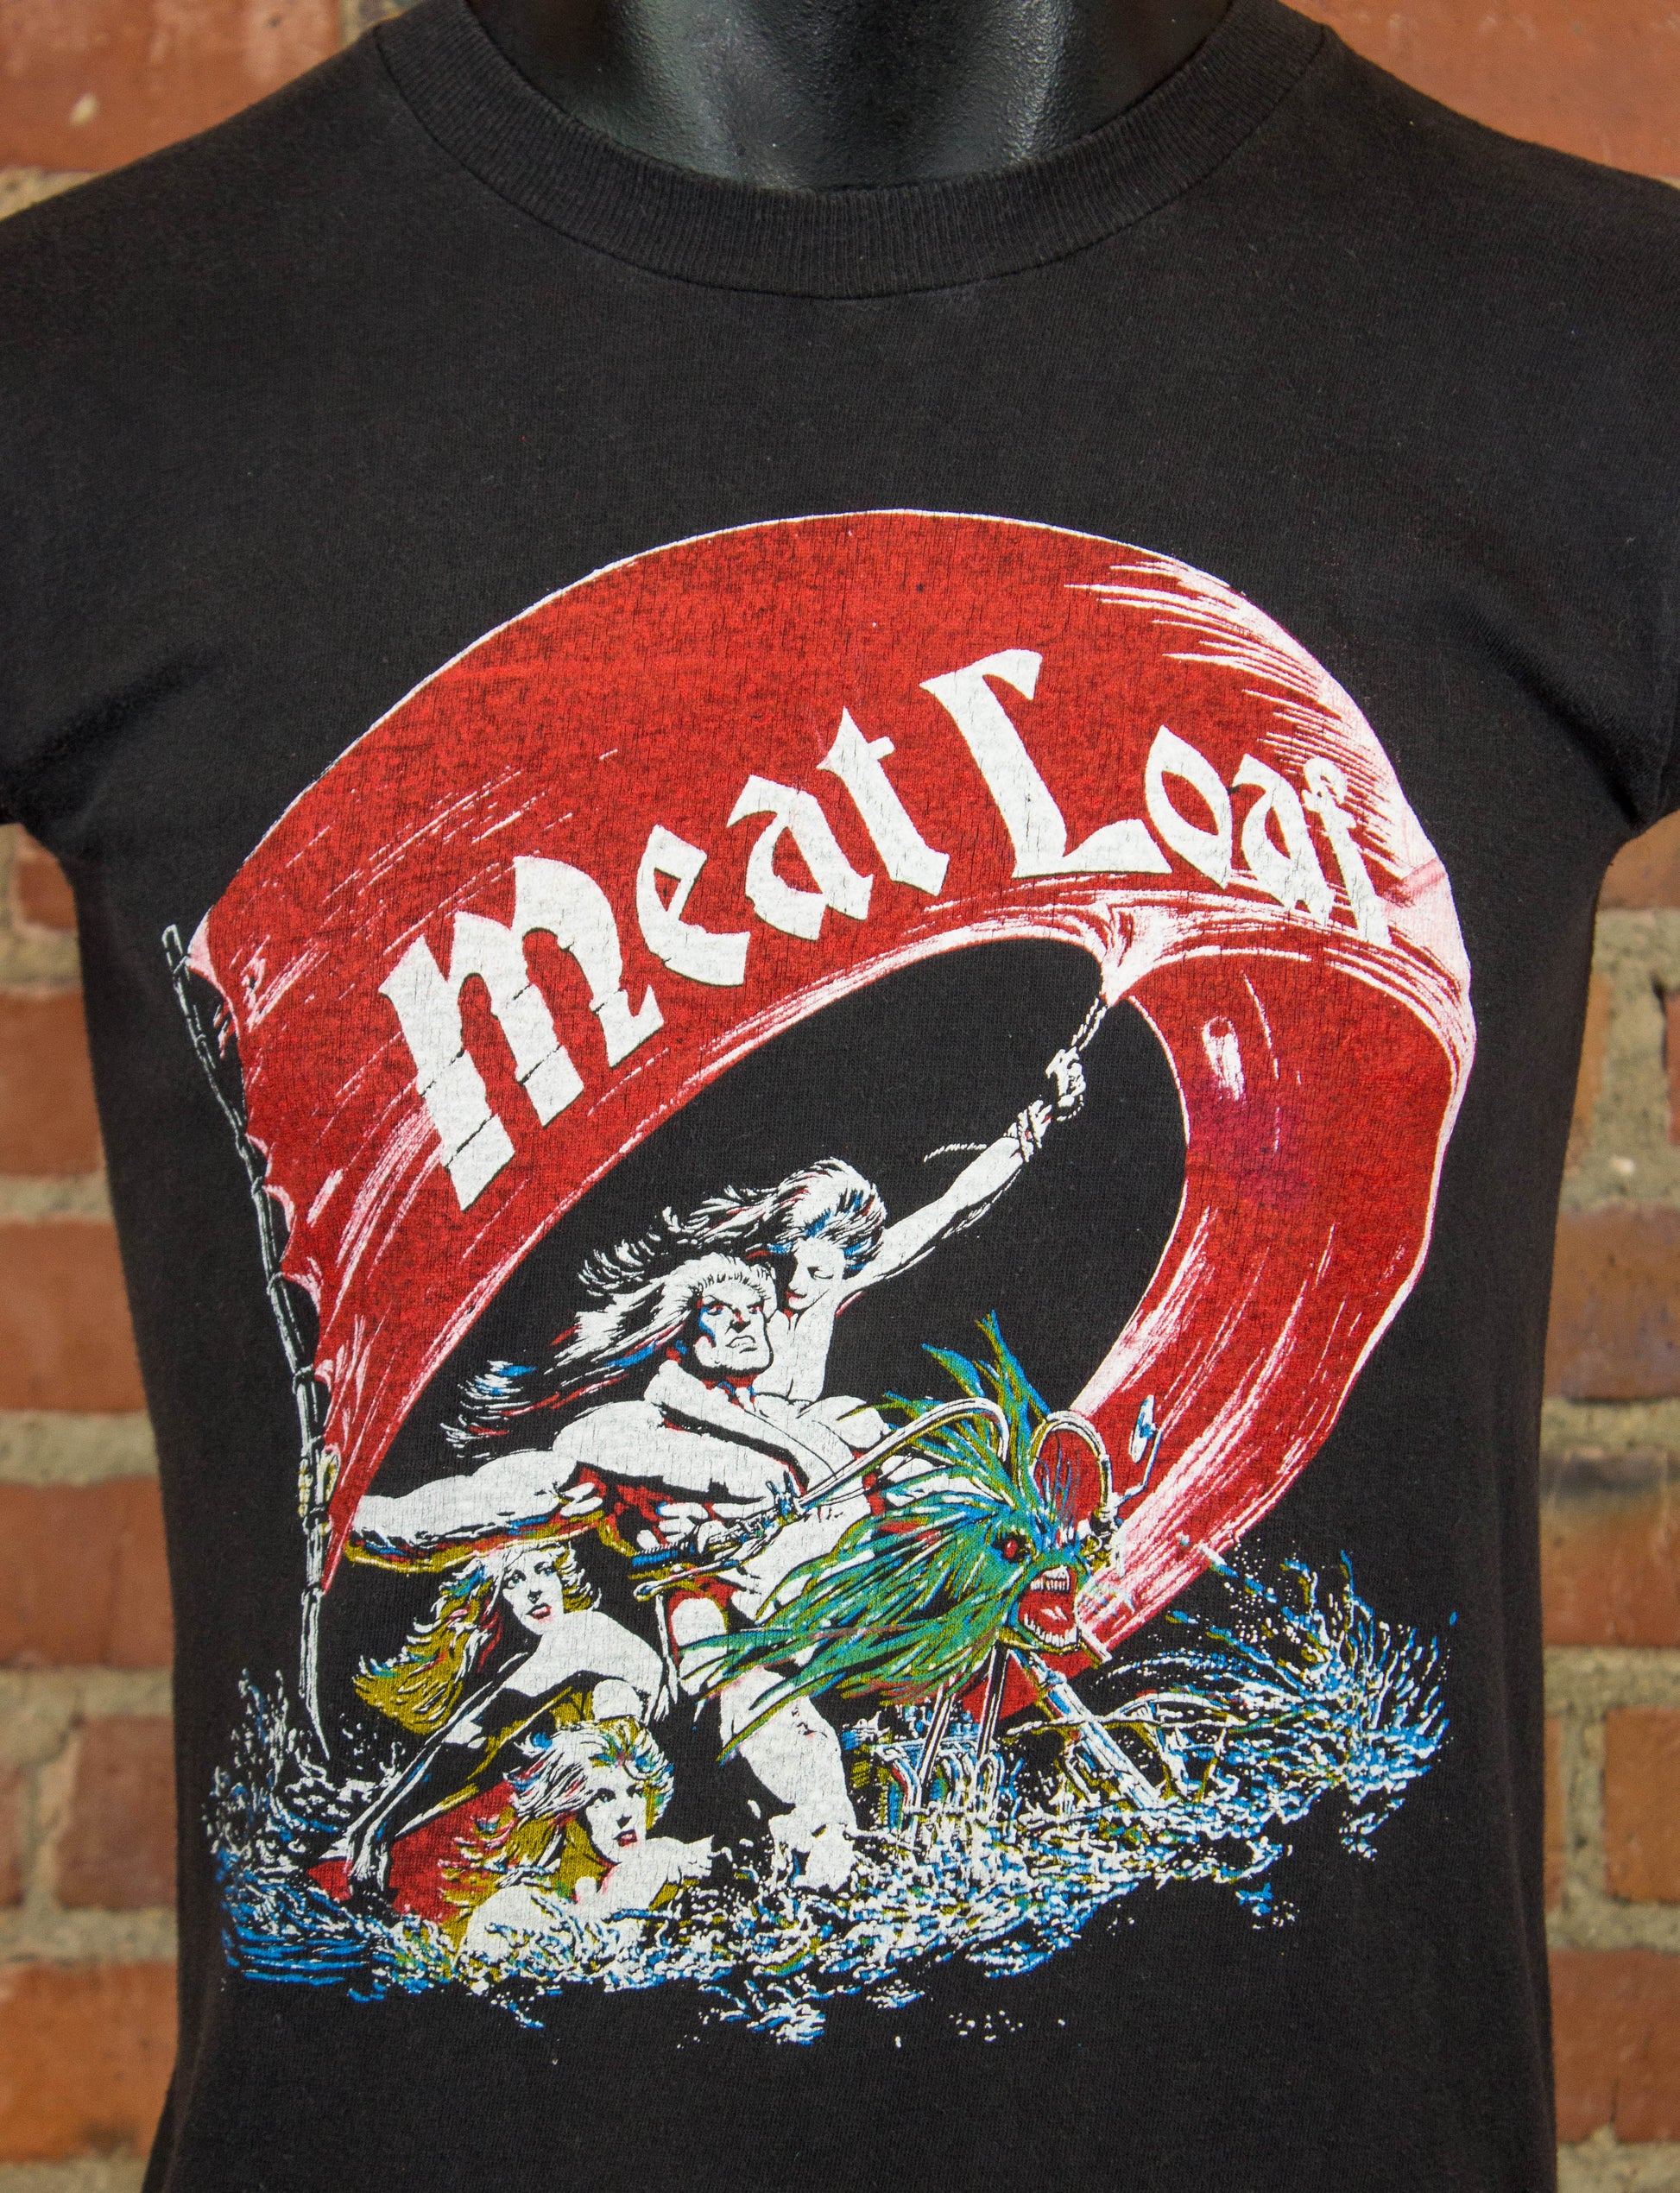 Vintage Meatloaf Concert T Shirt 70s Parking Lot Bootleg Black and Red Small